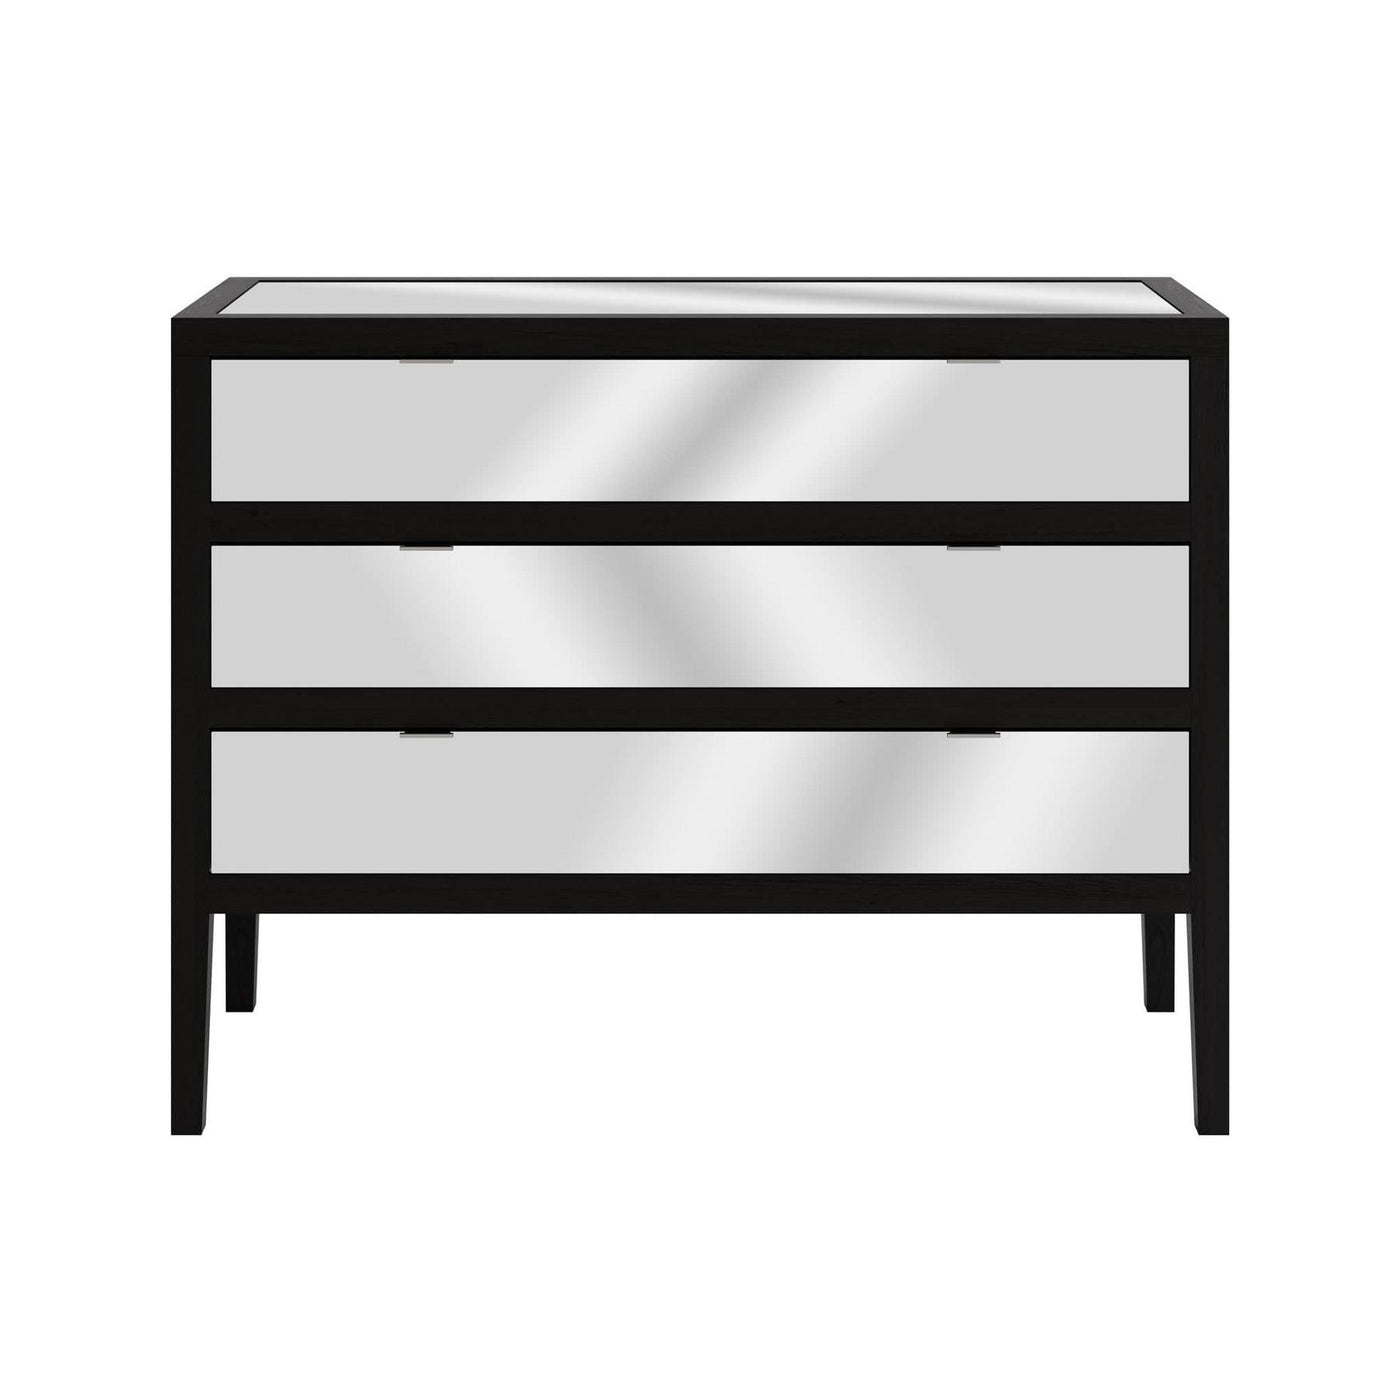 Josephine Chest of Drawers - Black by DI Designs-Esme Furnishings